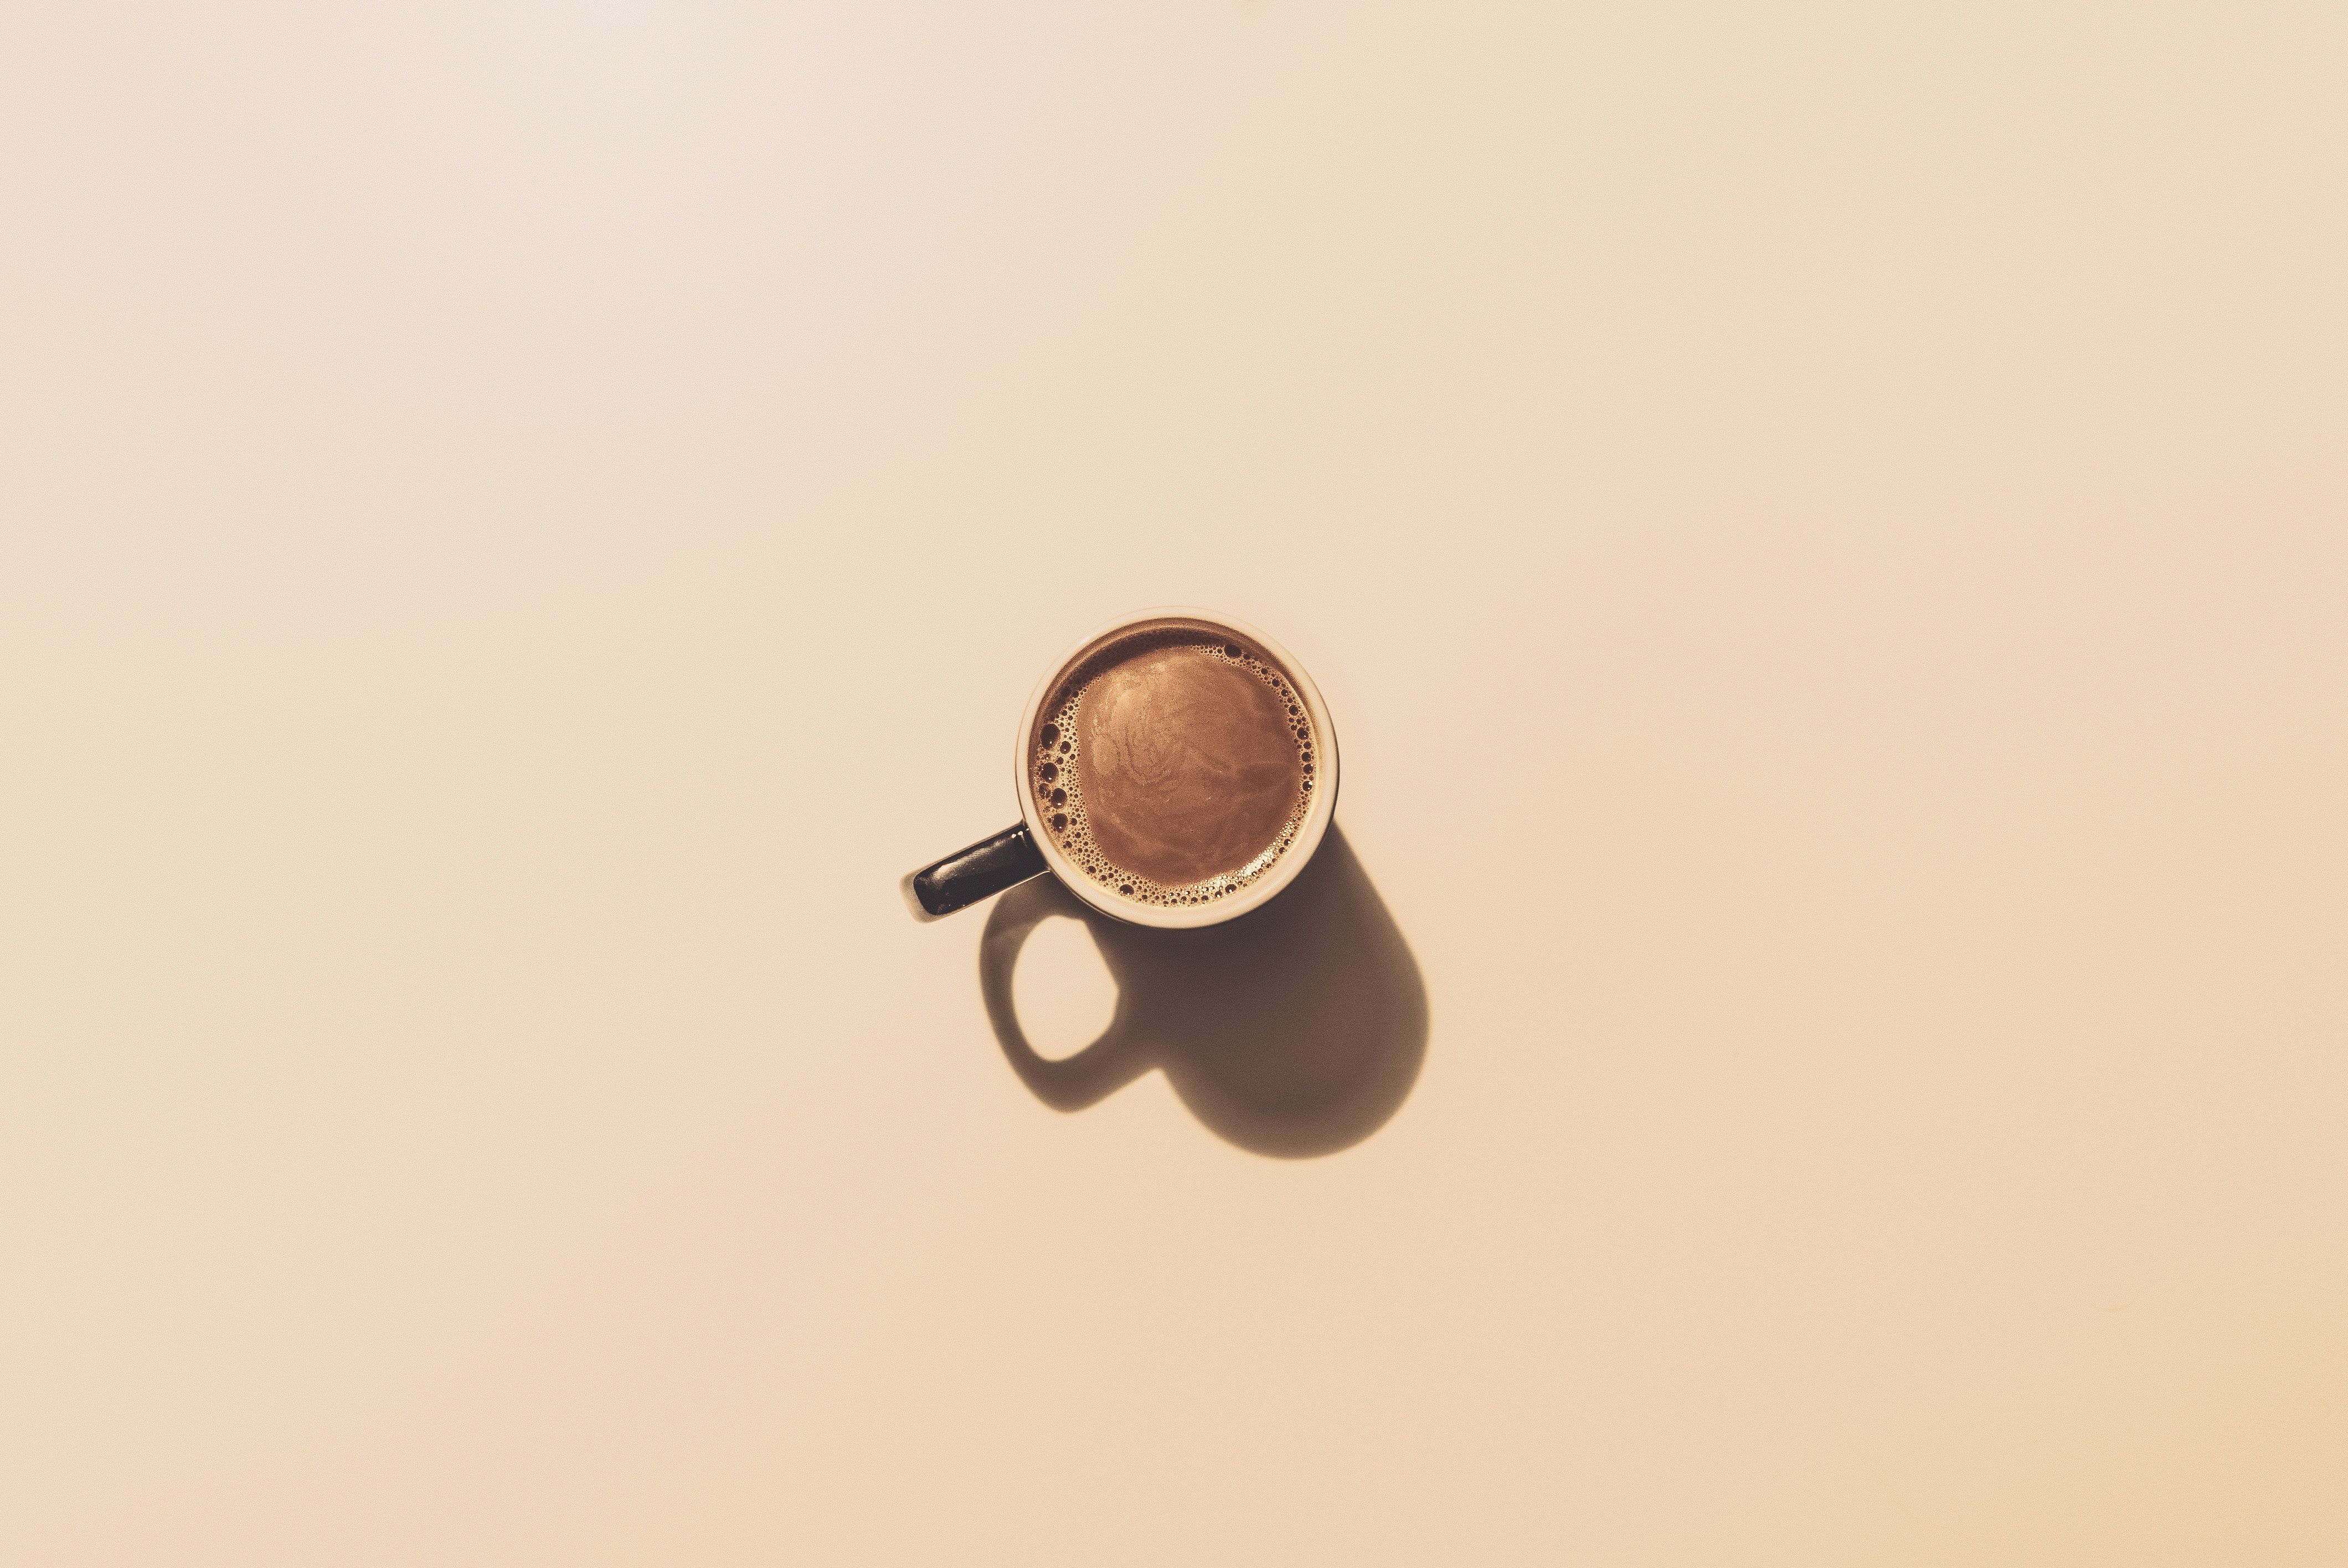 A cup of coffee over beige.